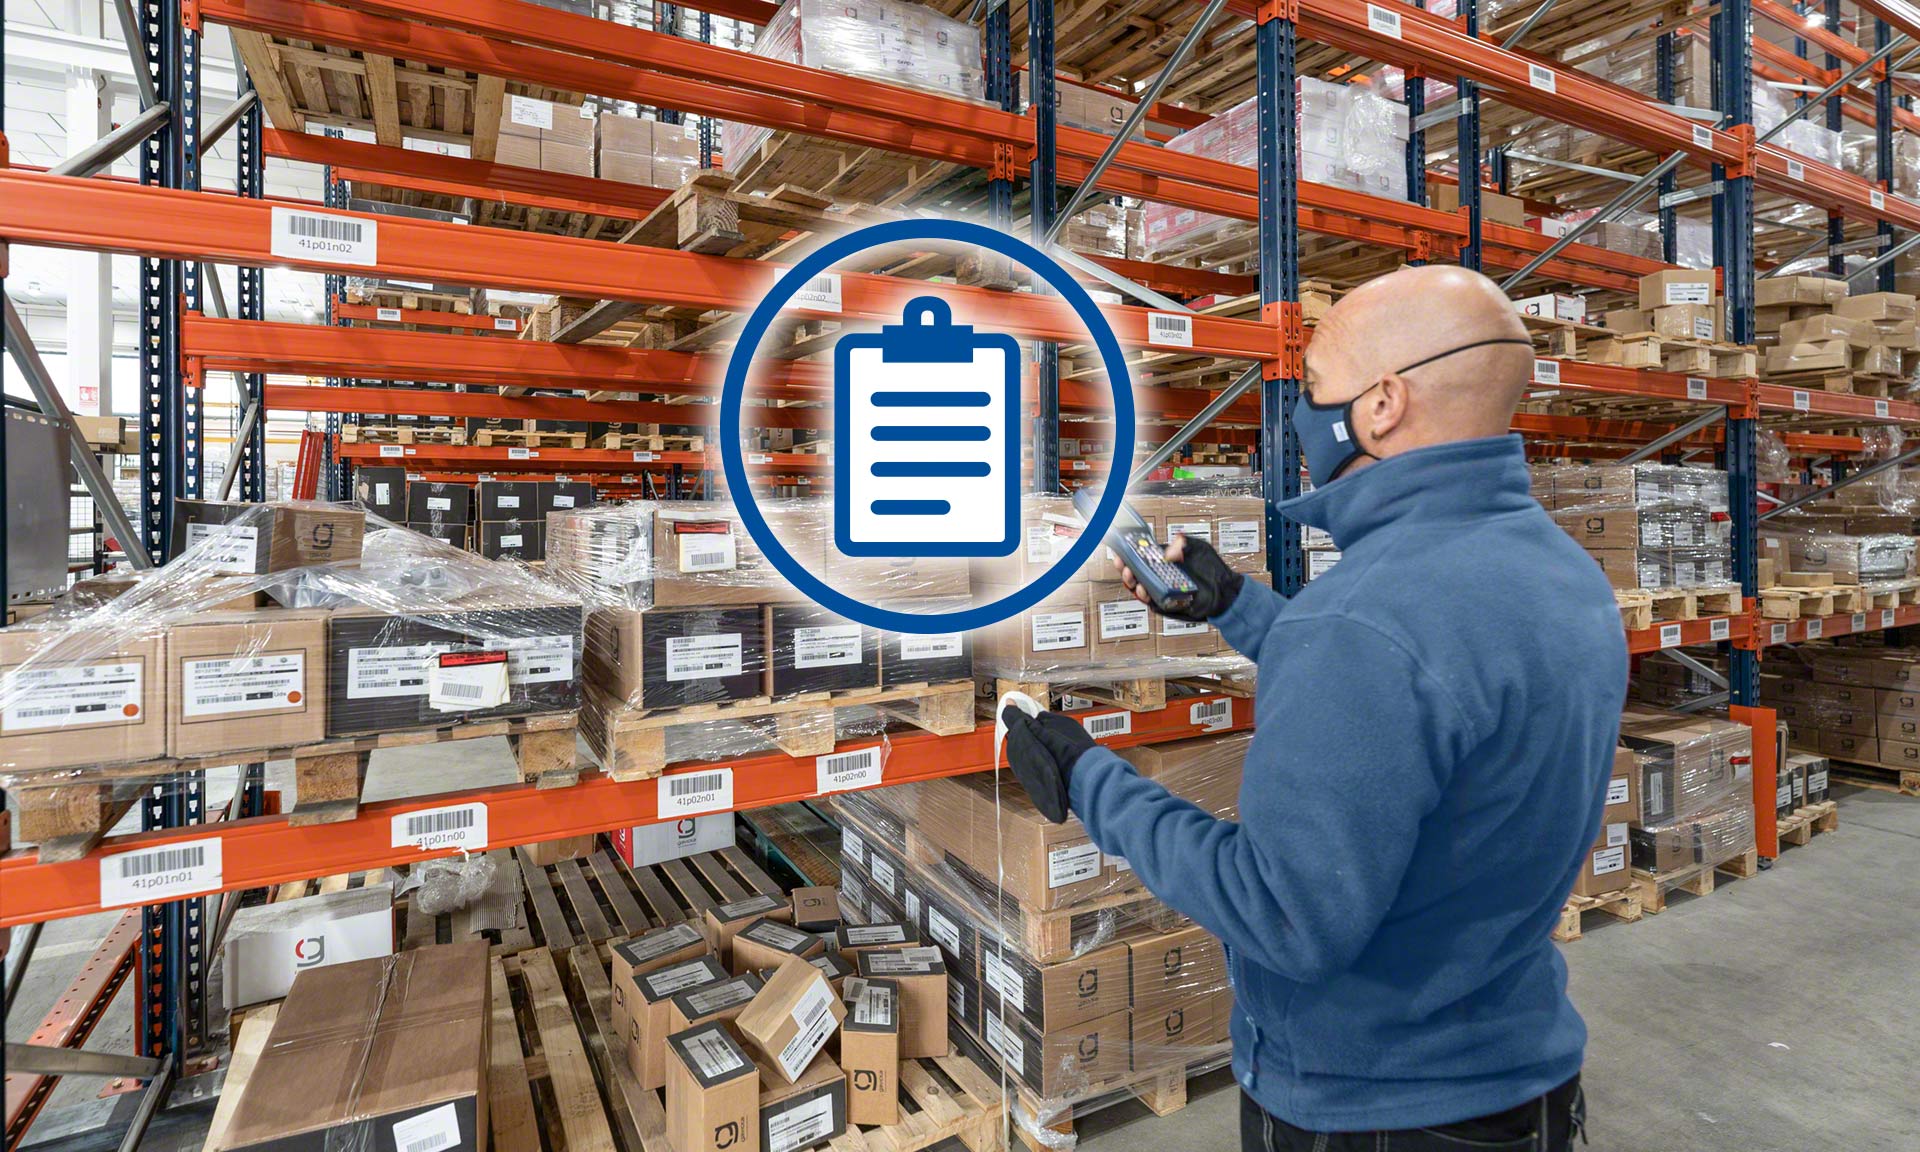 A periodic inventory system consists of counting the products in the warehouse several times a year